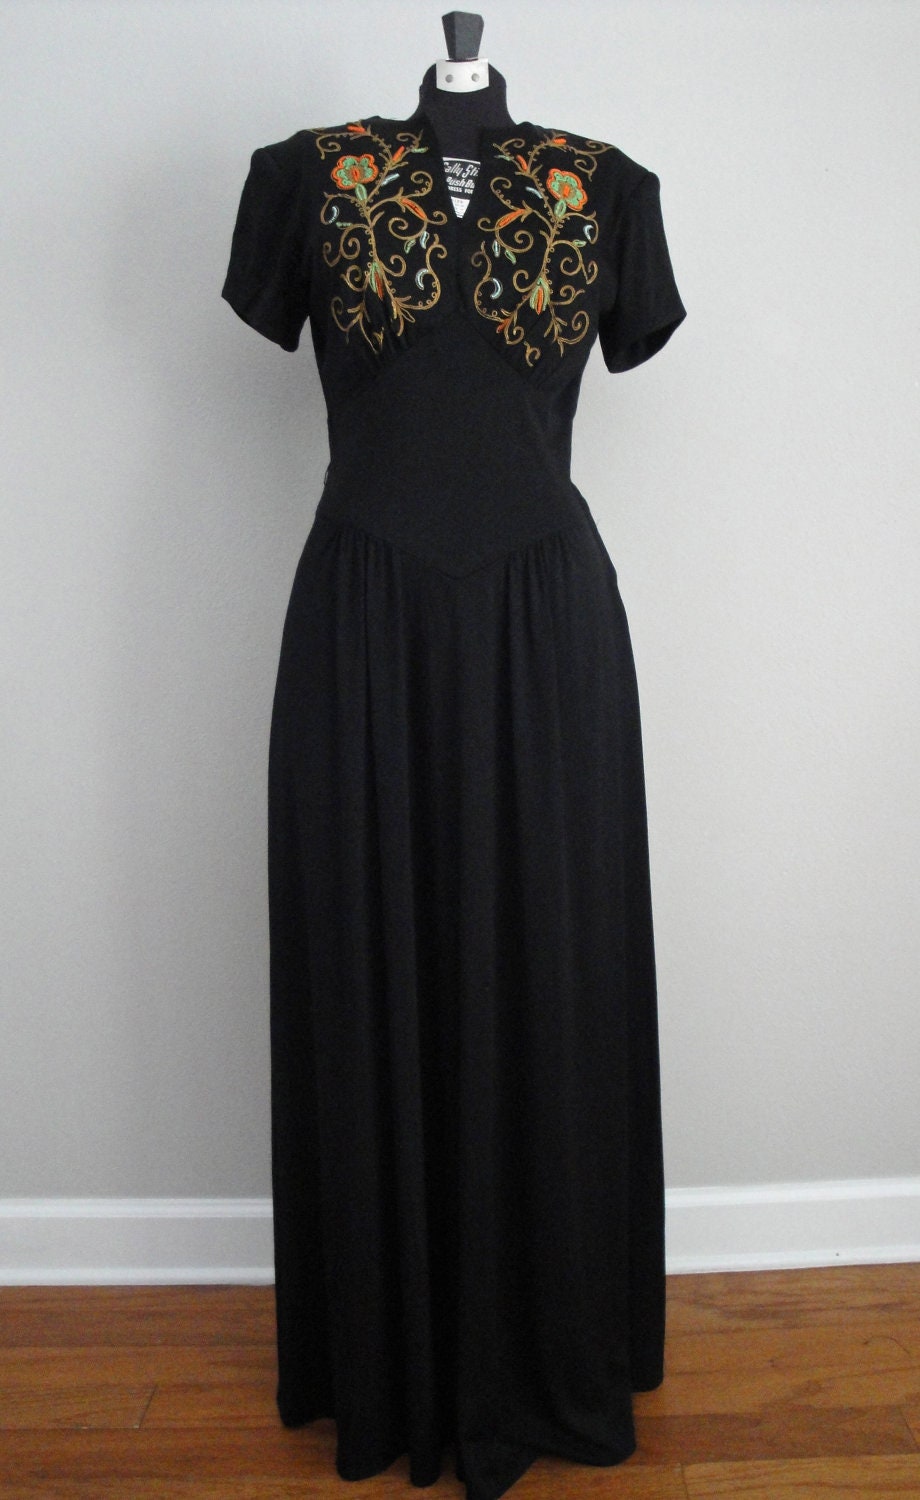 Vintage 1940s 40s Evening Dress Gown with Gold Thread